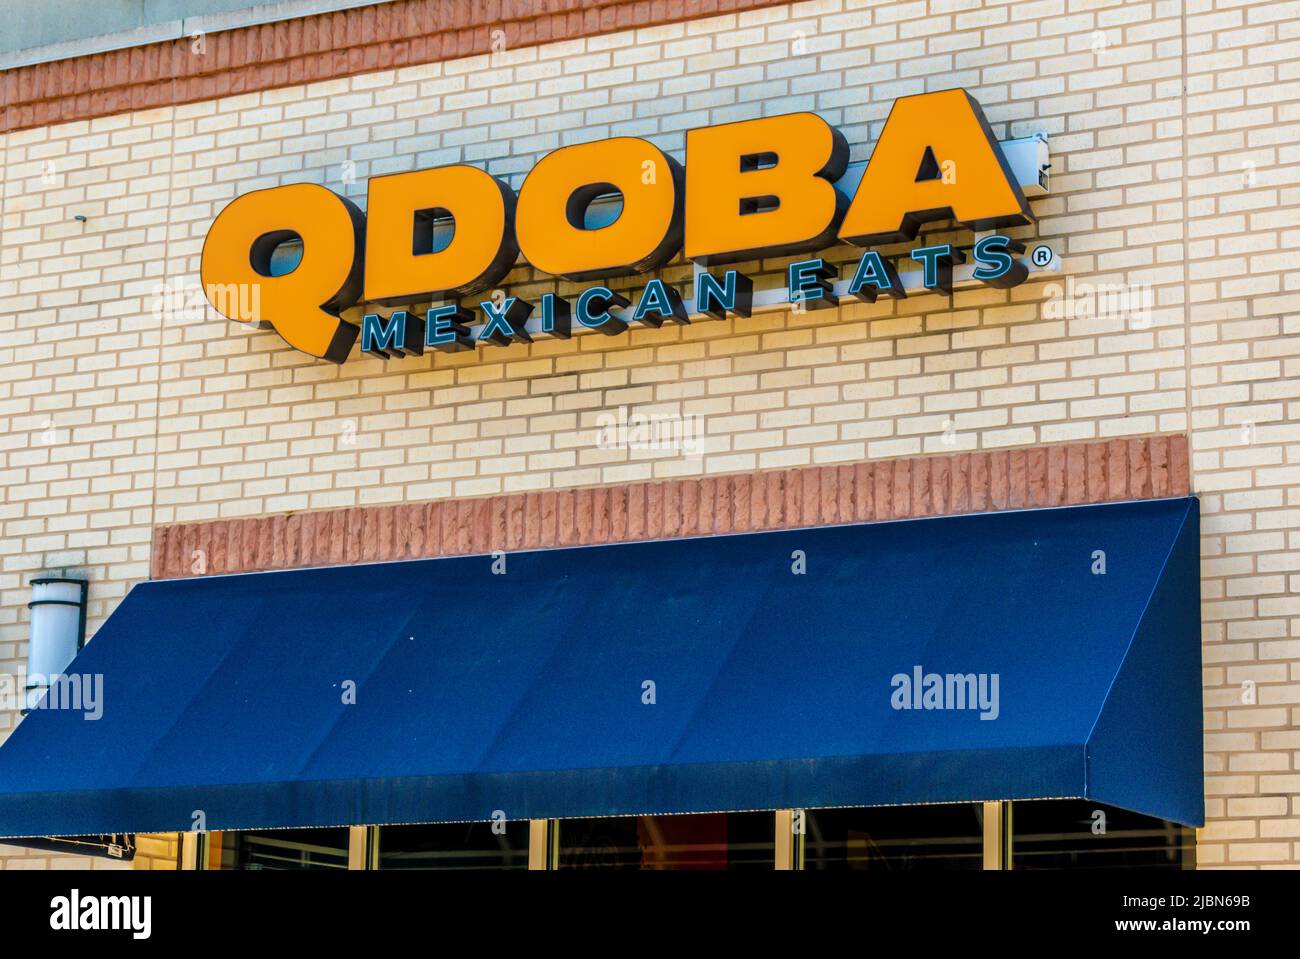 Qdoba Mexican Eats restaurant exterior facade brand and logo signage in orange letters on beige bricks above blue awning on a sunny day. Stock Photo